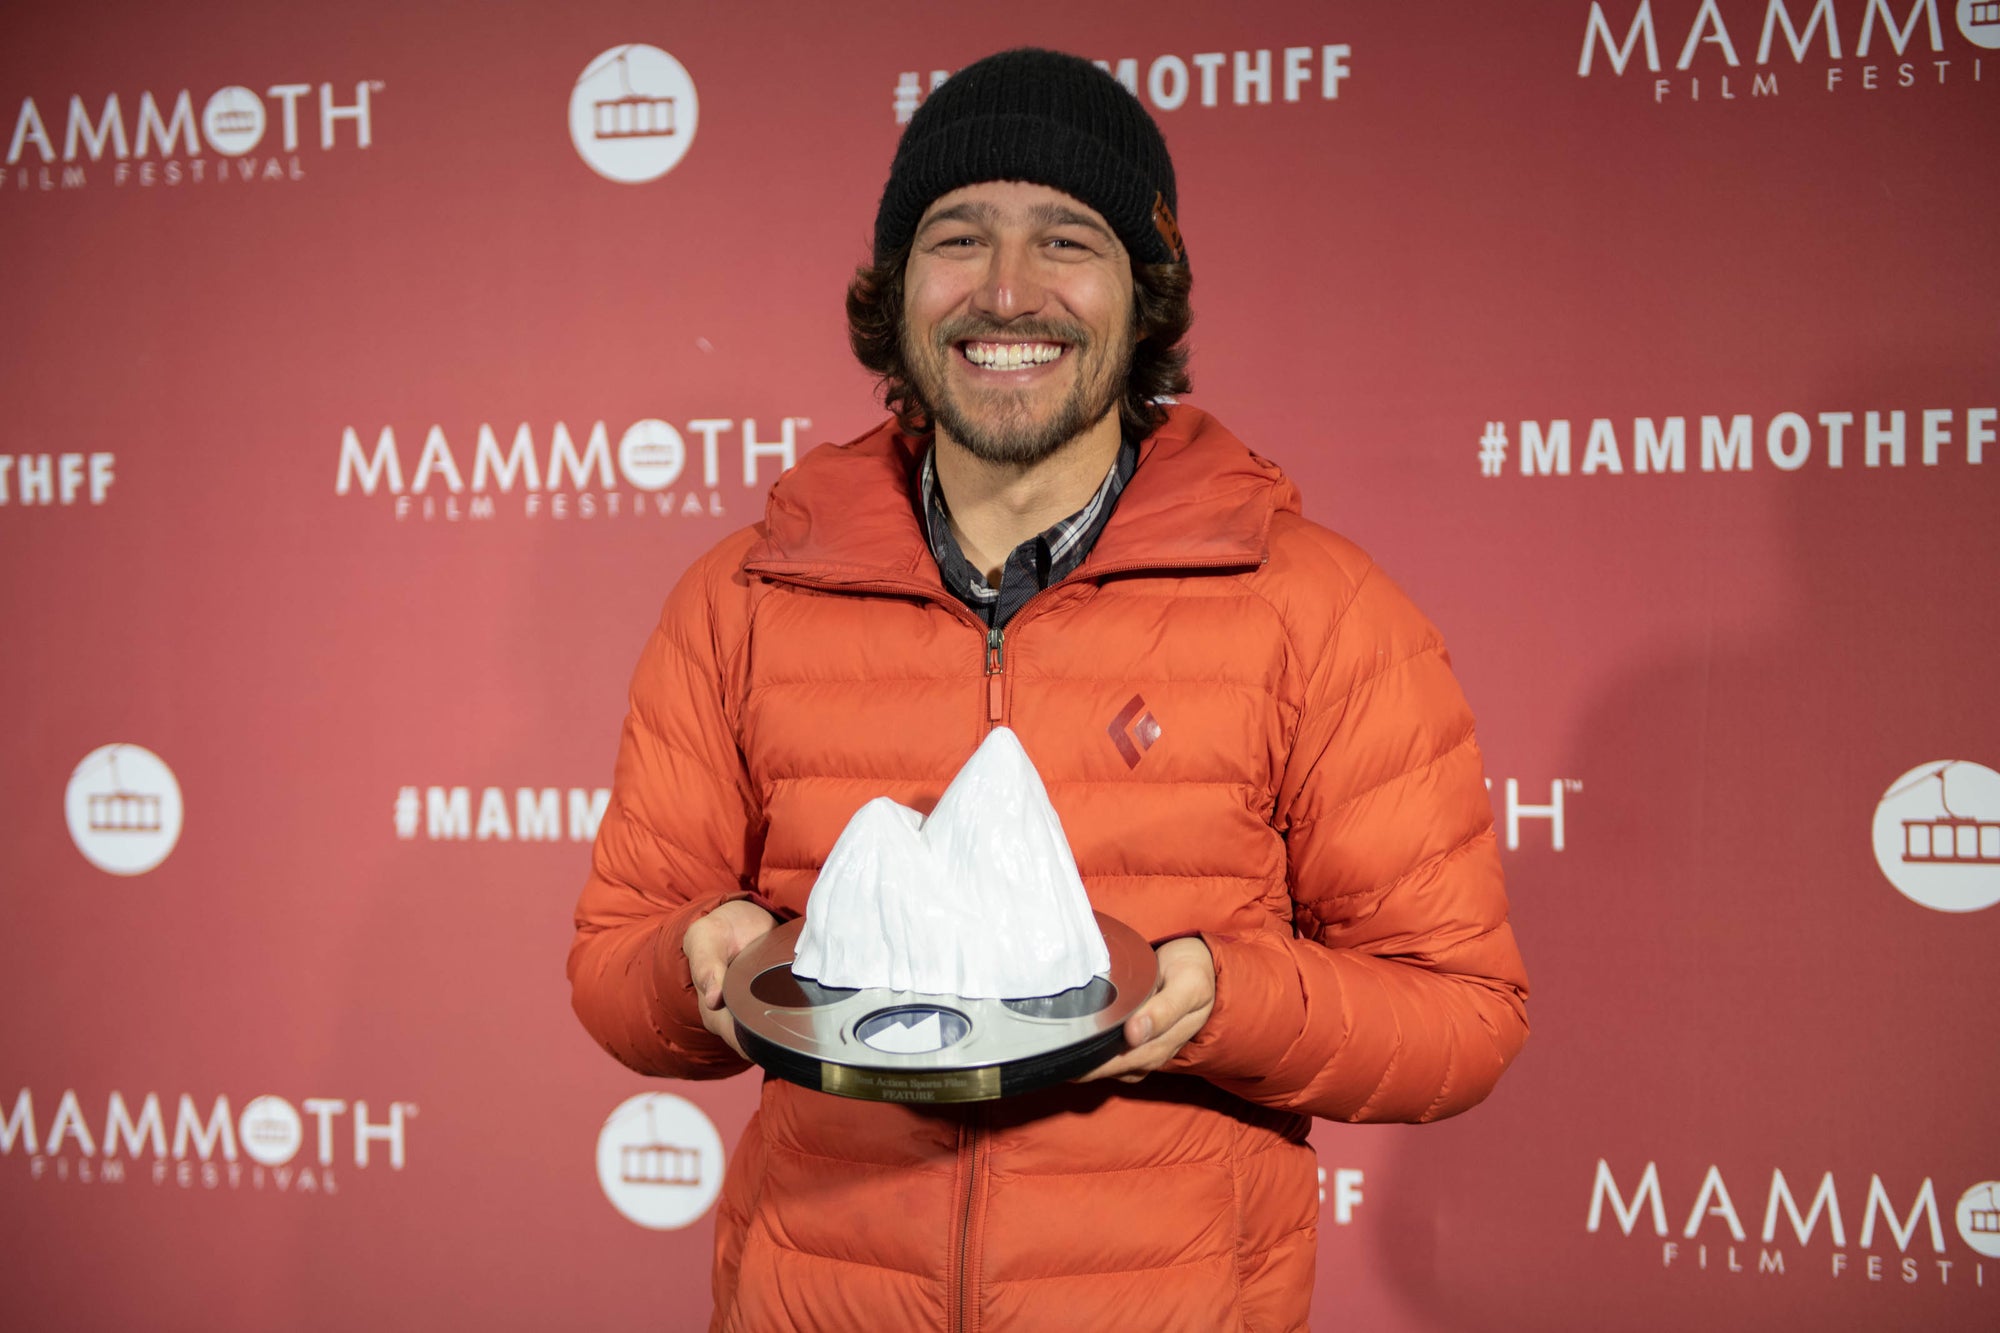 Nick Cahill holds an award he won at the Mammoth Film Festival.